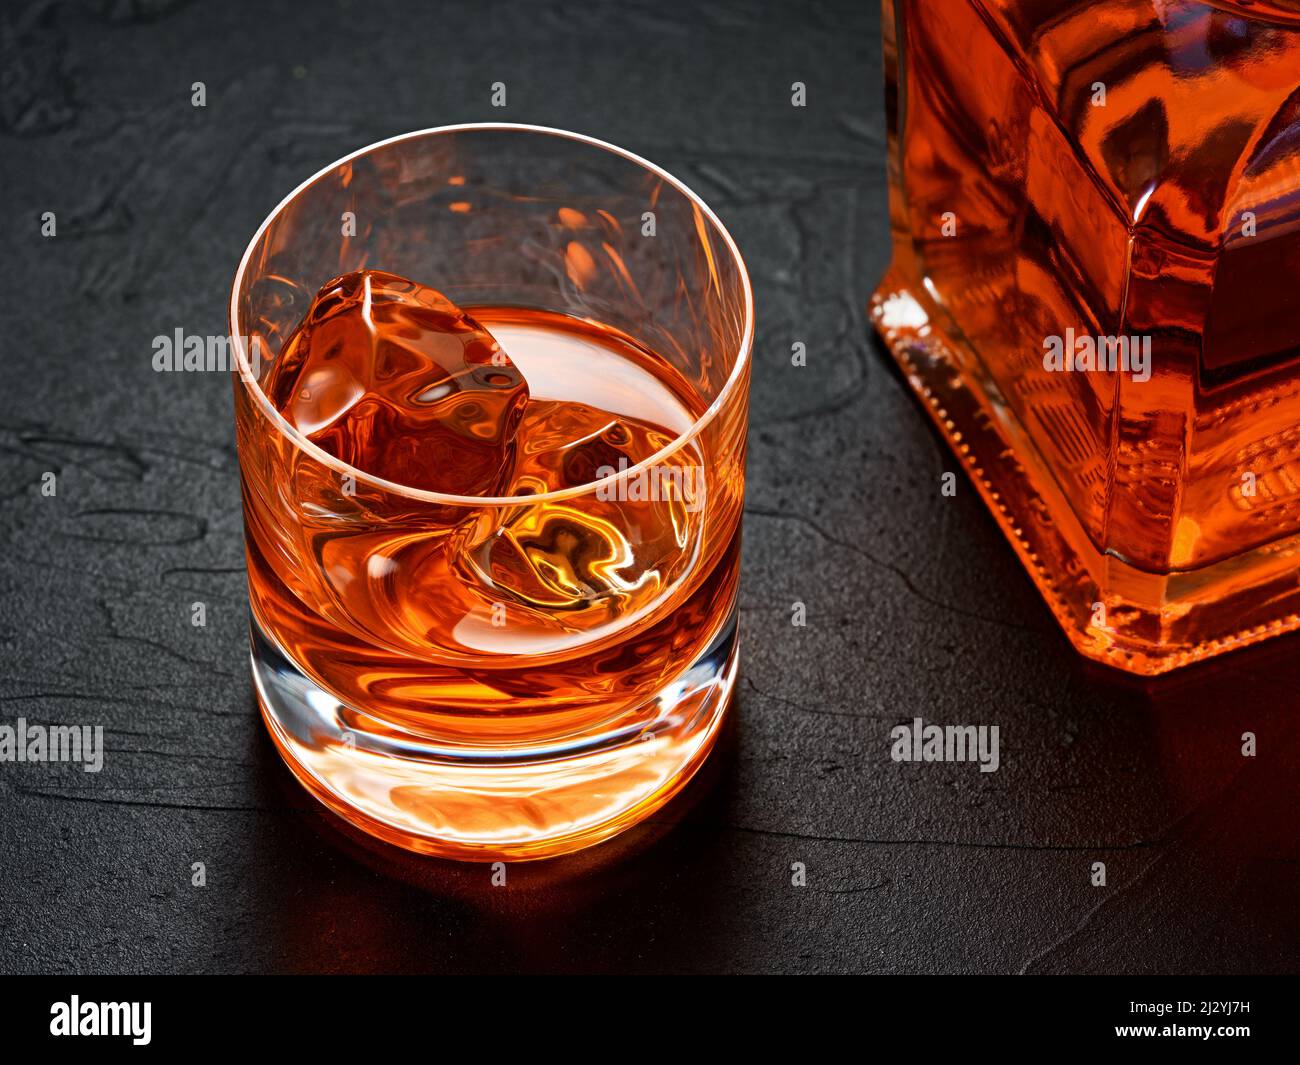 https://c8.alamy.com/comp/2J2YJ7H/glass-of-elegant-whiskey-with-ice-and-whisky-bottle-hard-drink-concept-2J2YJ7H.jpg